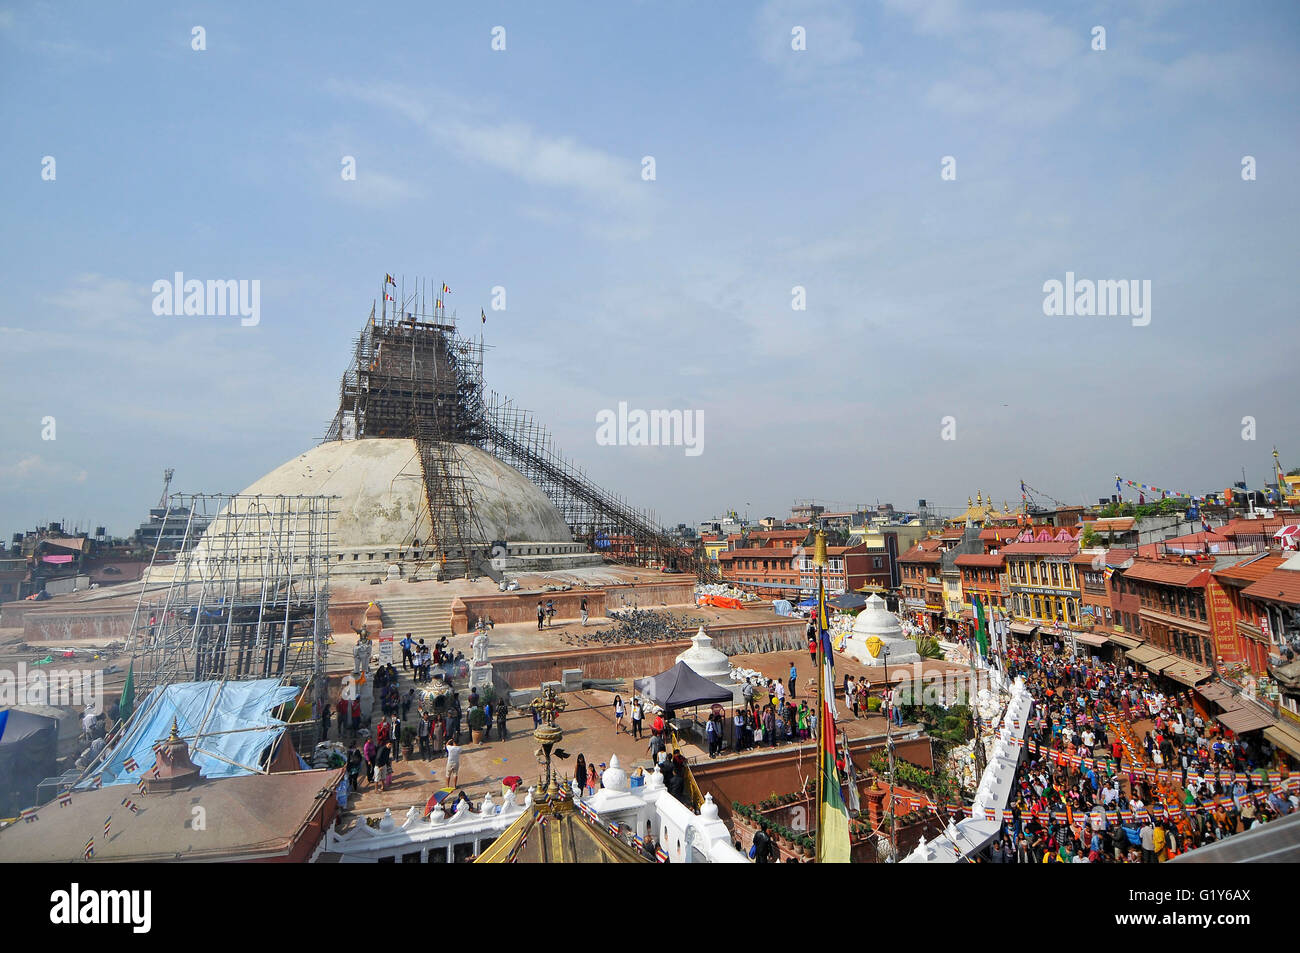 Devotees offering rituals prayer at the Boudhanath stupa, one of the largest stupas in the world during celebration the 2,560th Buddha Purnima festival, Birth Anniversary of Lord Gautam Buddha at Boudhanath Stupa, Kathmandu on May 21, 2016. Buddhists around the world, Cambodia; Thailand; Myanmar; Bhutan; Sri Lanka; Laos; Mongolia; Japan; Singapore; Taiwan including Nepal, observe Buddha Purnima festival which falls on the same day of full moon of the month calendar. The occasion offerings of flower, incense and candles, an exchange of gifts as blessings, prayers, sermons and group meditations. Stock Photo